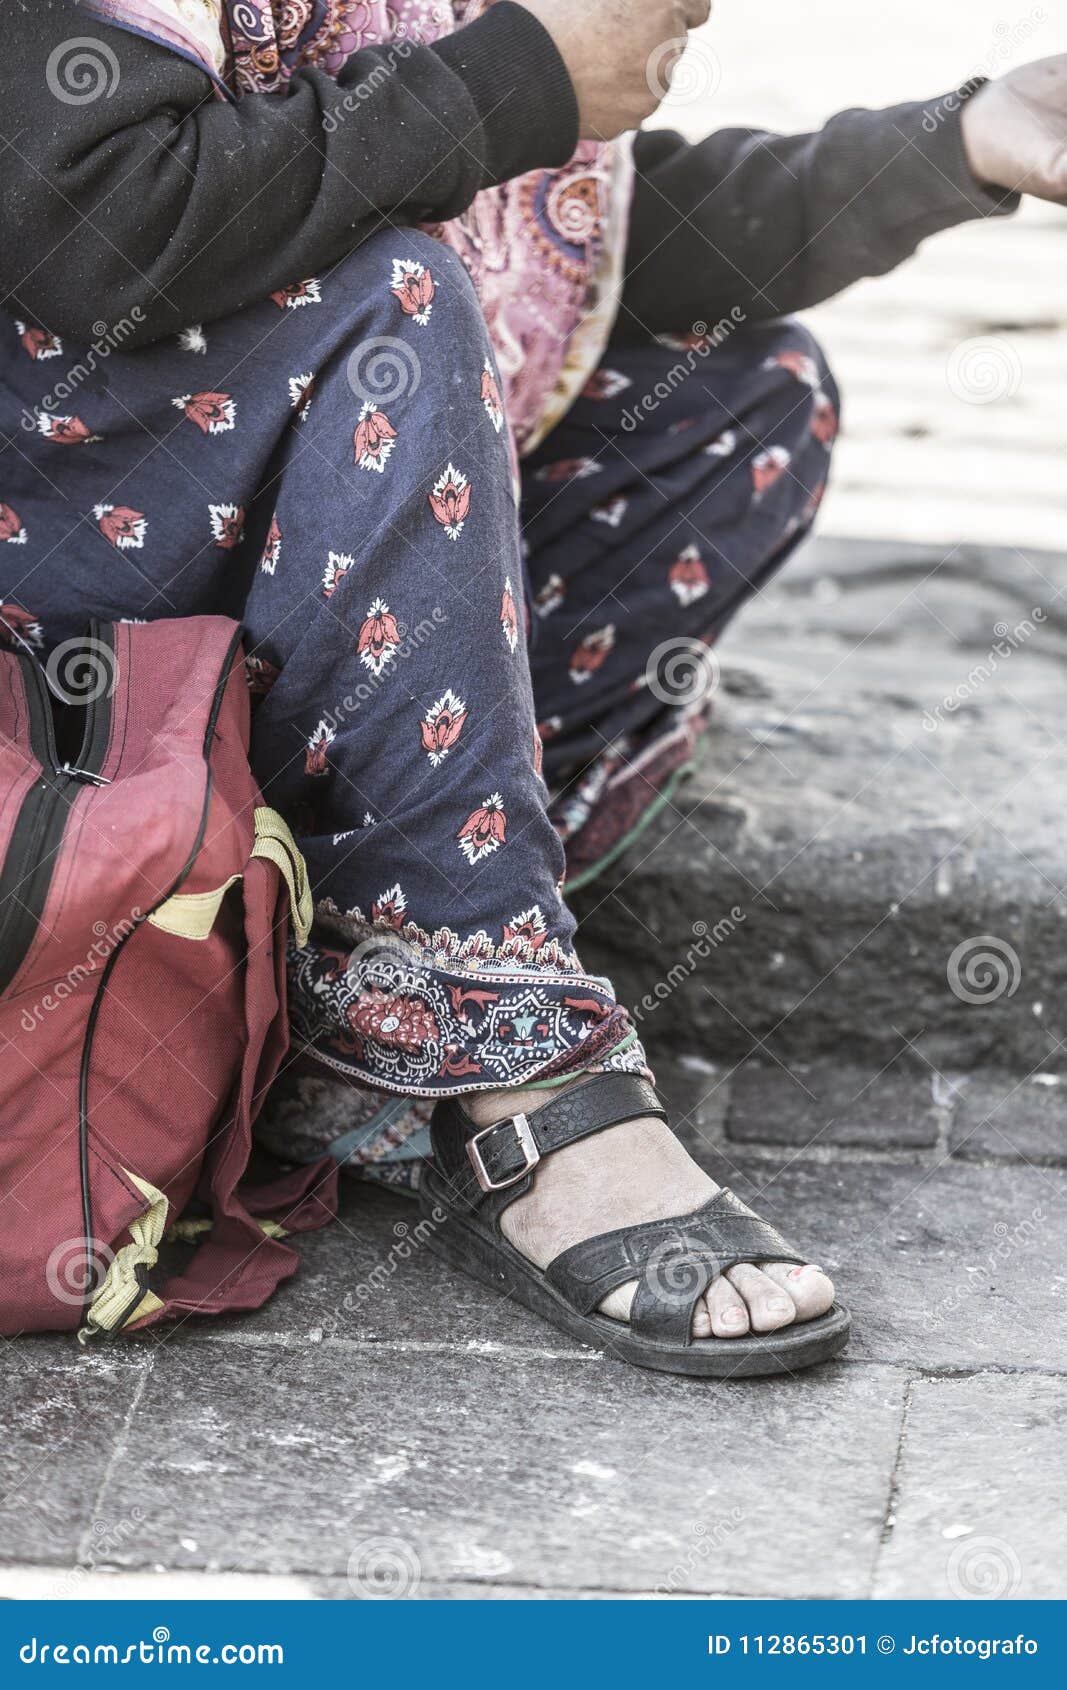 detail of the feet of the homeless woman